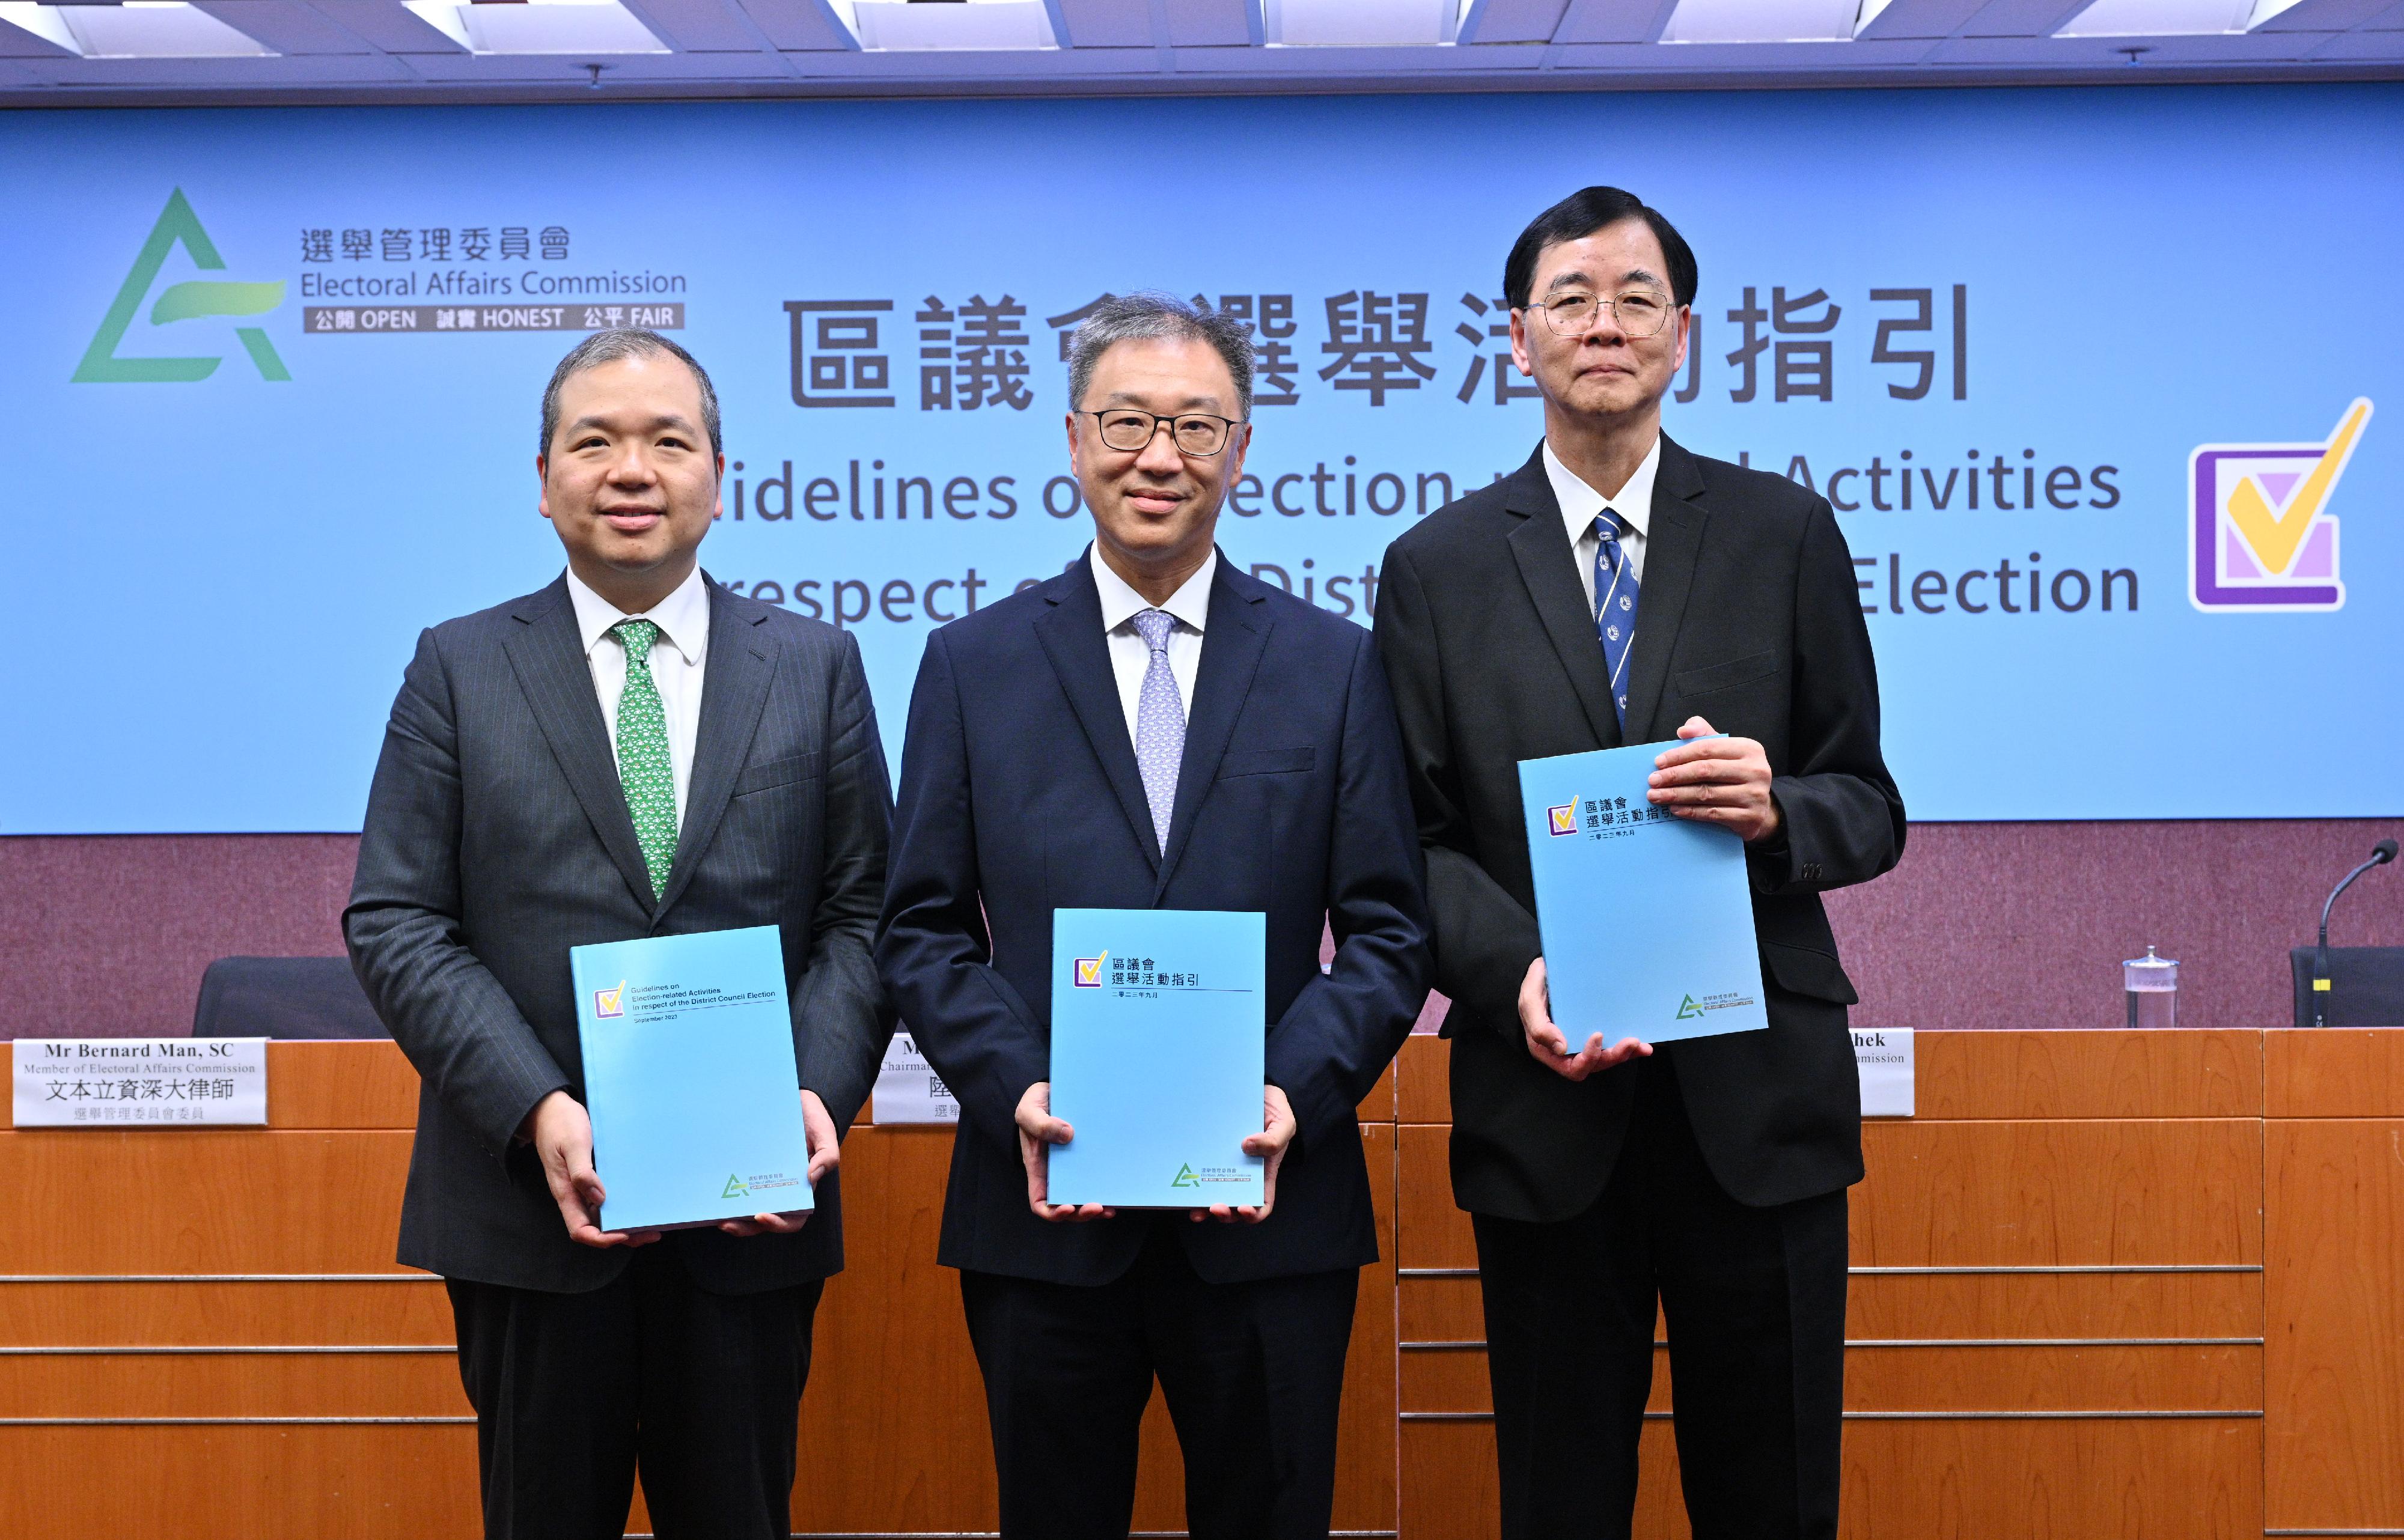 The Chairman of the Electoral Affairs Commission (EAC), Mr Justice David Lok (centre), and EAC members Professor Daniel Shek (right) and Mr Bernard Man, SC (left) present the Guidelines on Election-related Activities in respect of the District Council Election at a press conference today (September 28).